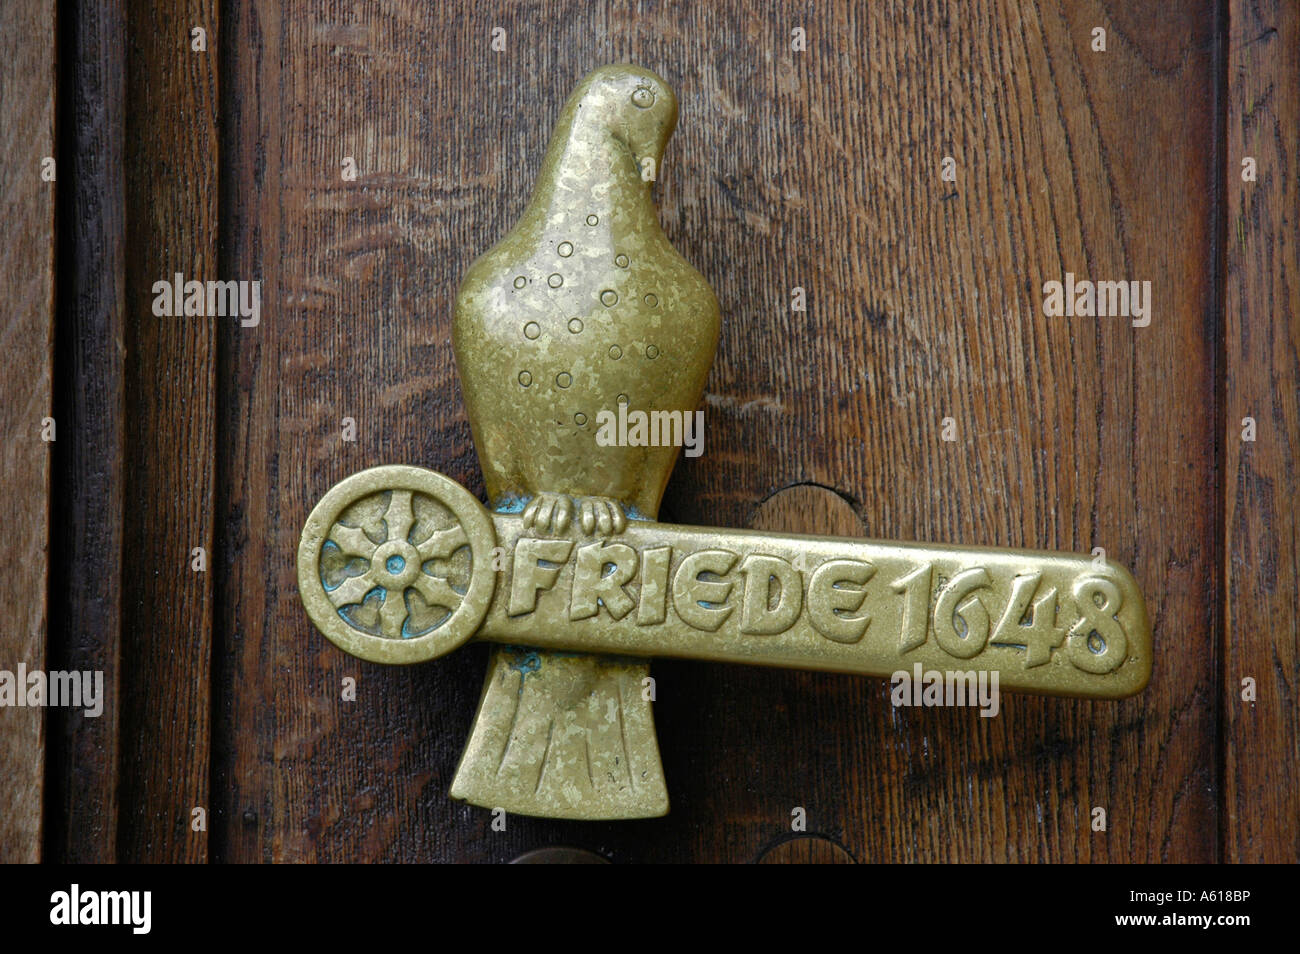 Door handle with the writing 'westphalian peace 1648', town hall, Osnabrueck, Lower Saxony, Germany Stock Photo